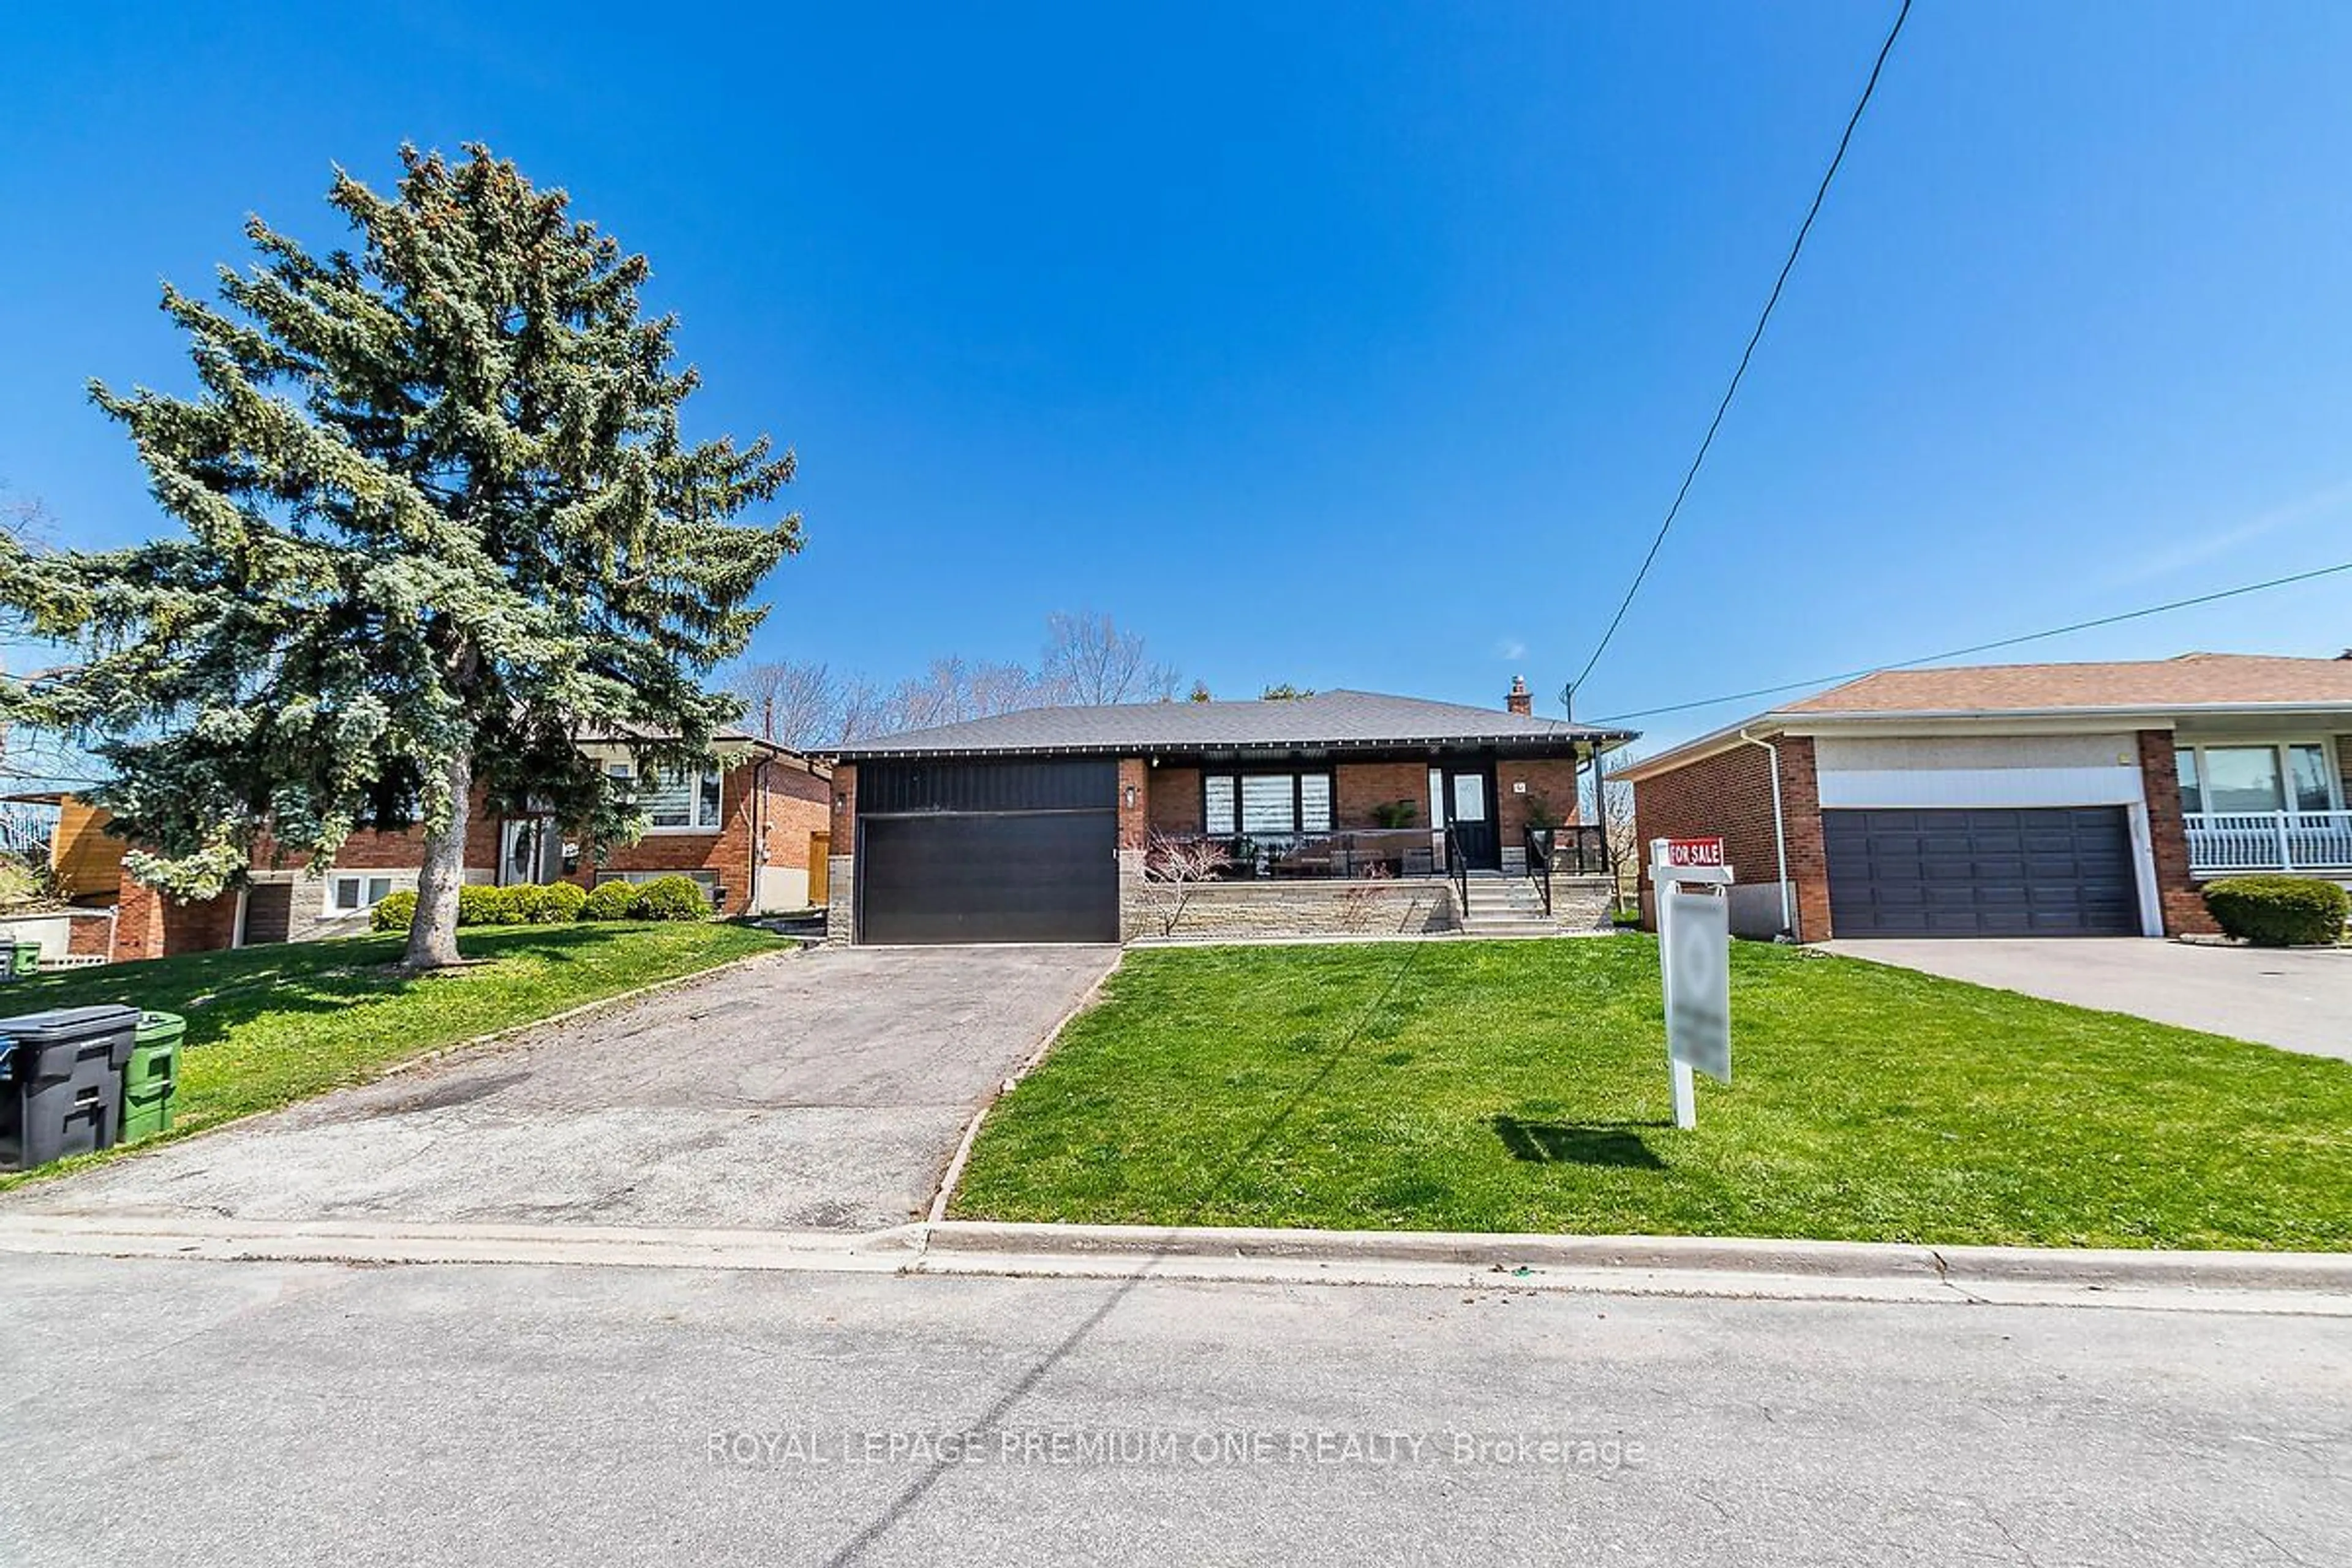 Frontside or backside of a home for 42 Mangrove Rd, Toronto Ontario M6L 2A3